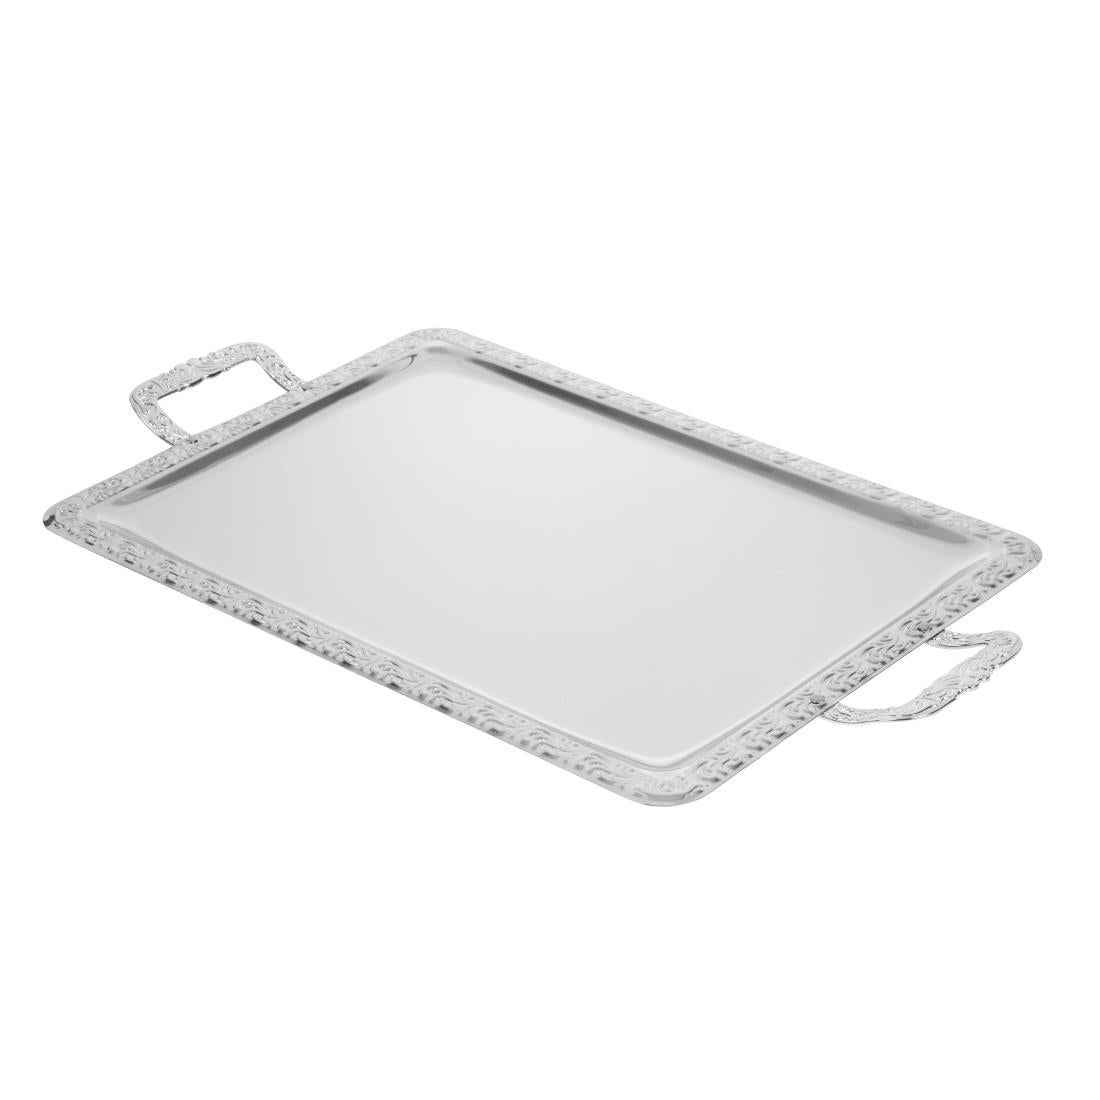 APS Stainless Steel Rectangular Handled Service Tray 600mm JD Catering Equipment Solutions Ltd